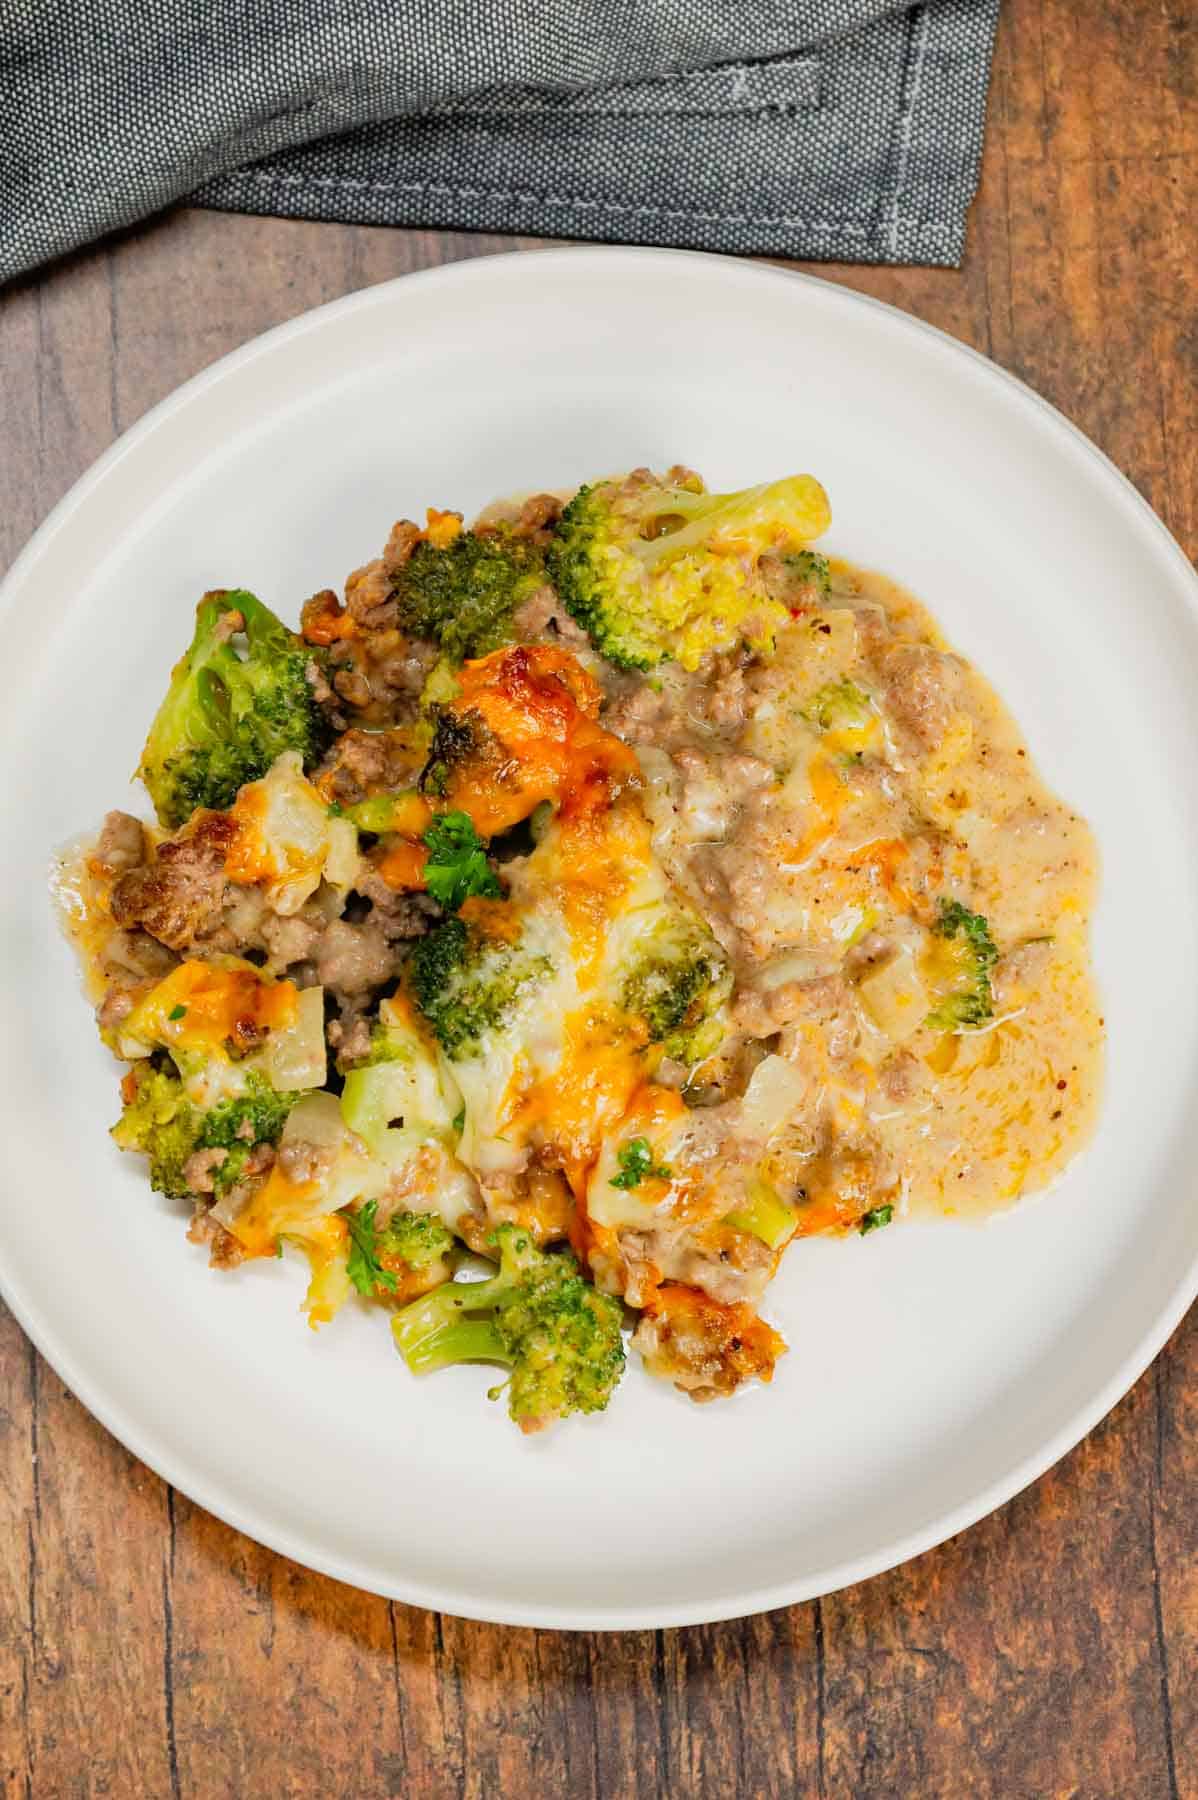 Ground Beef and Broccoli Casserole is a hearty dish loaded with ground beef, broccoli florets, diced onions, alfredo sauce, Italian seasoning, mozzarella cheese and cheddar cheese.